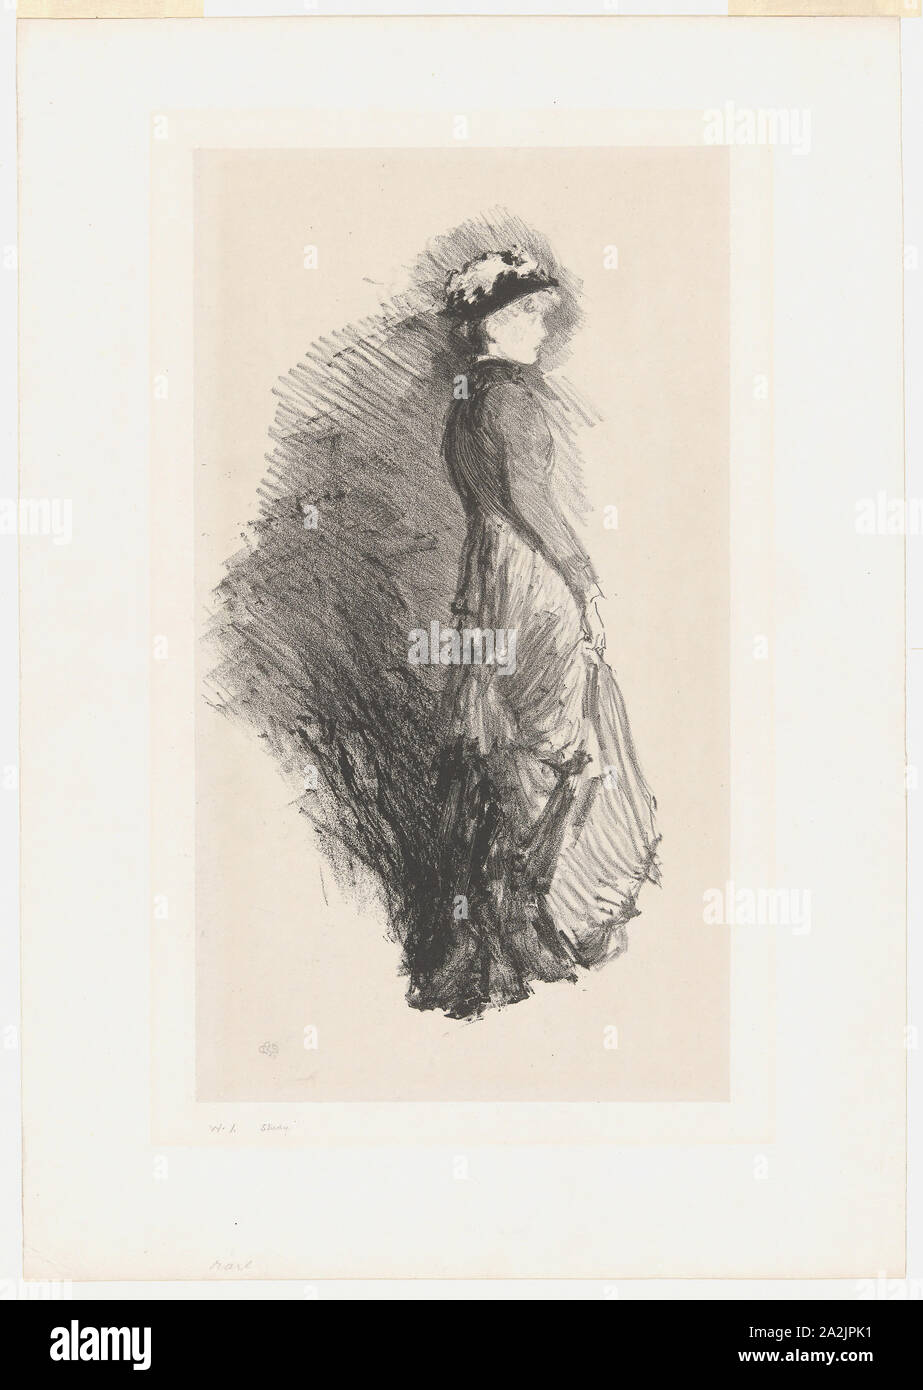 Study, 1878, James McNeill Whistler, American, 1834-1903, United States, Lithograph in black ink with scraping and roulette work on ivory chine laid down on off-white plate paper, 266 x 149 mm (image), 304 x 171 mm (primary support), 401 x 281 mm (secondary support Stock Photo